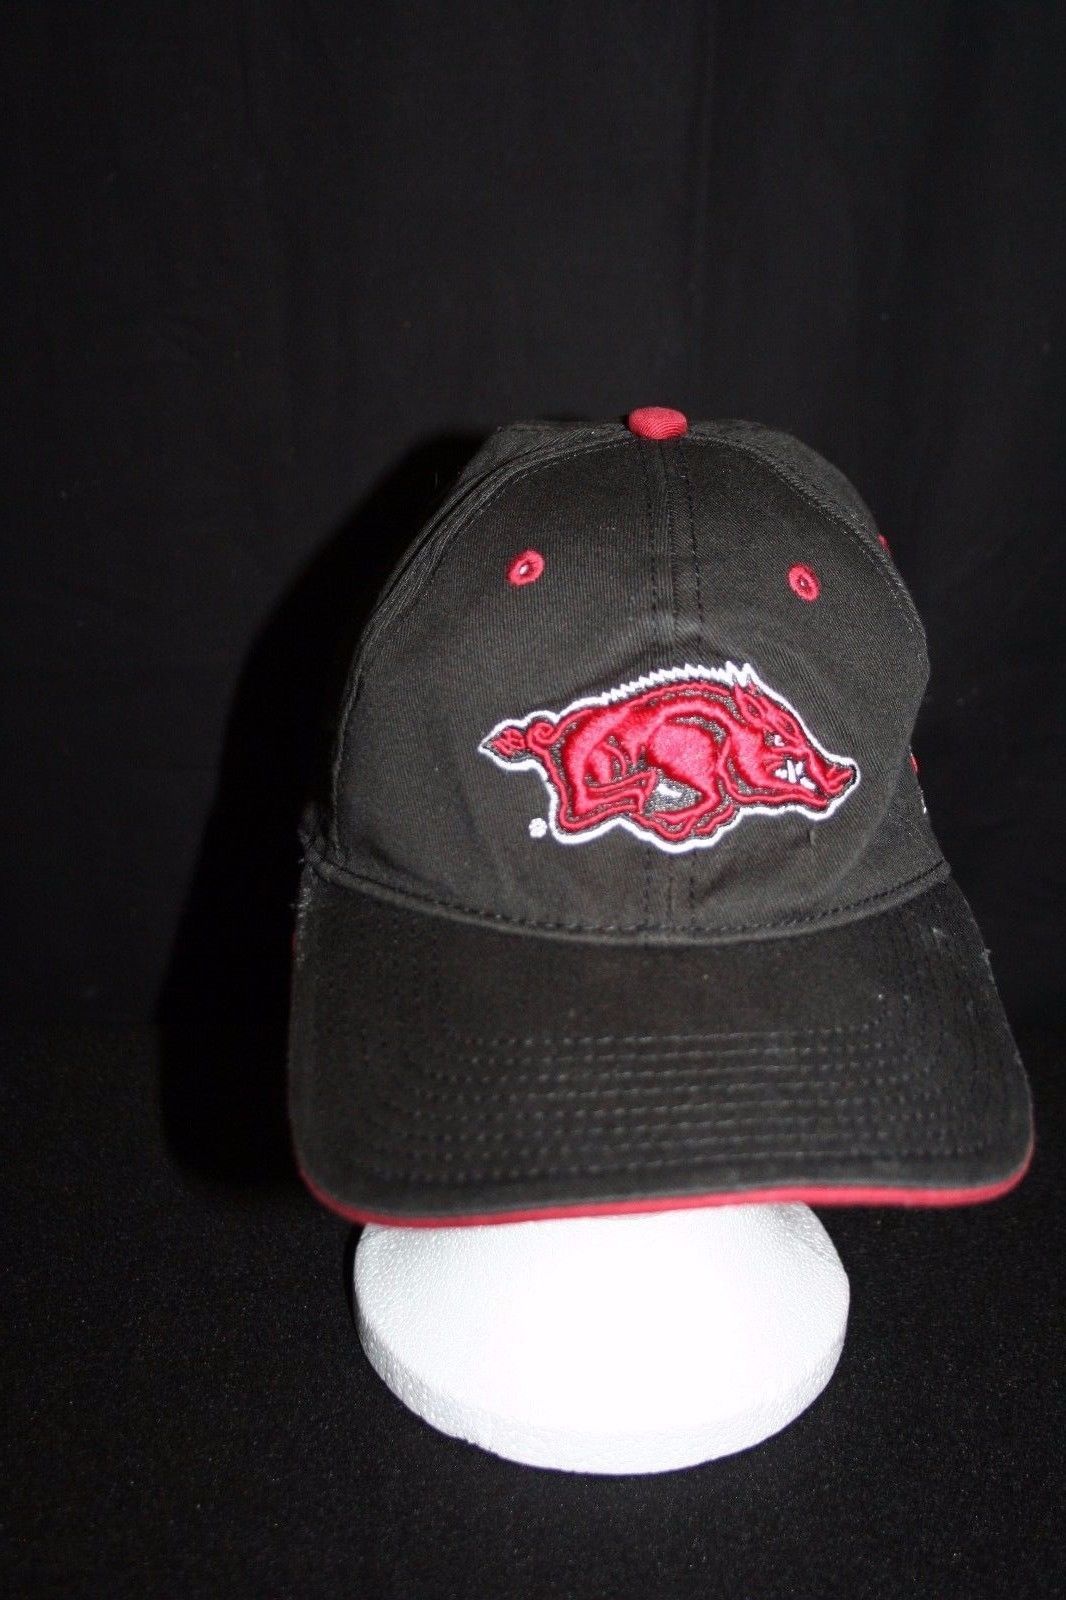 Primary image for The Game NCAA Arkansas Razorbacks Mascot Stretch One Size CAP/HAT